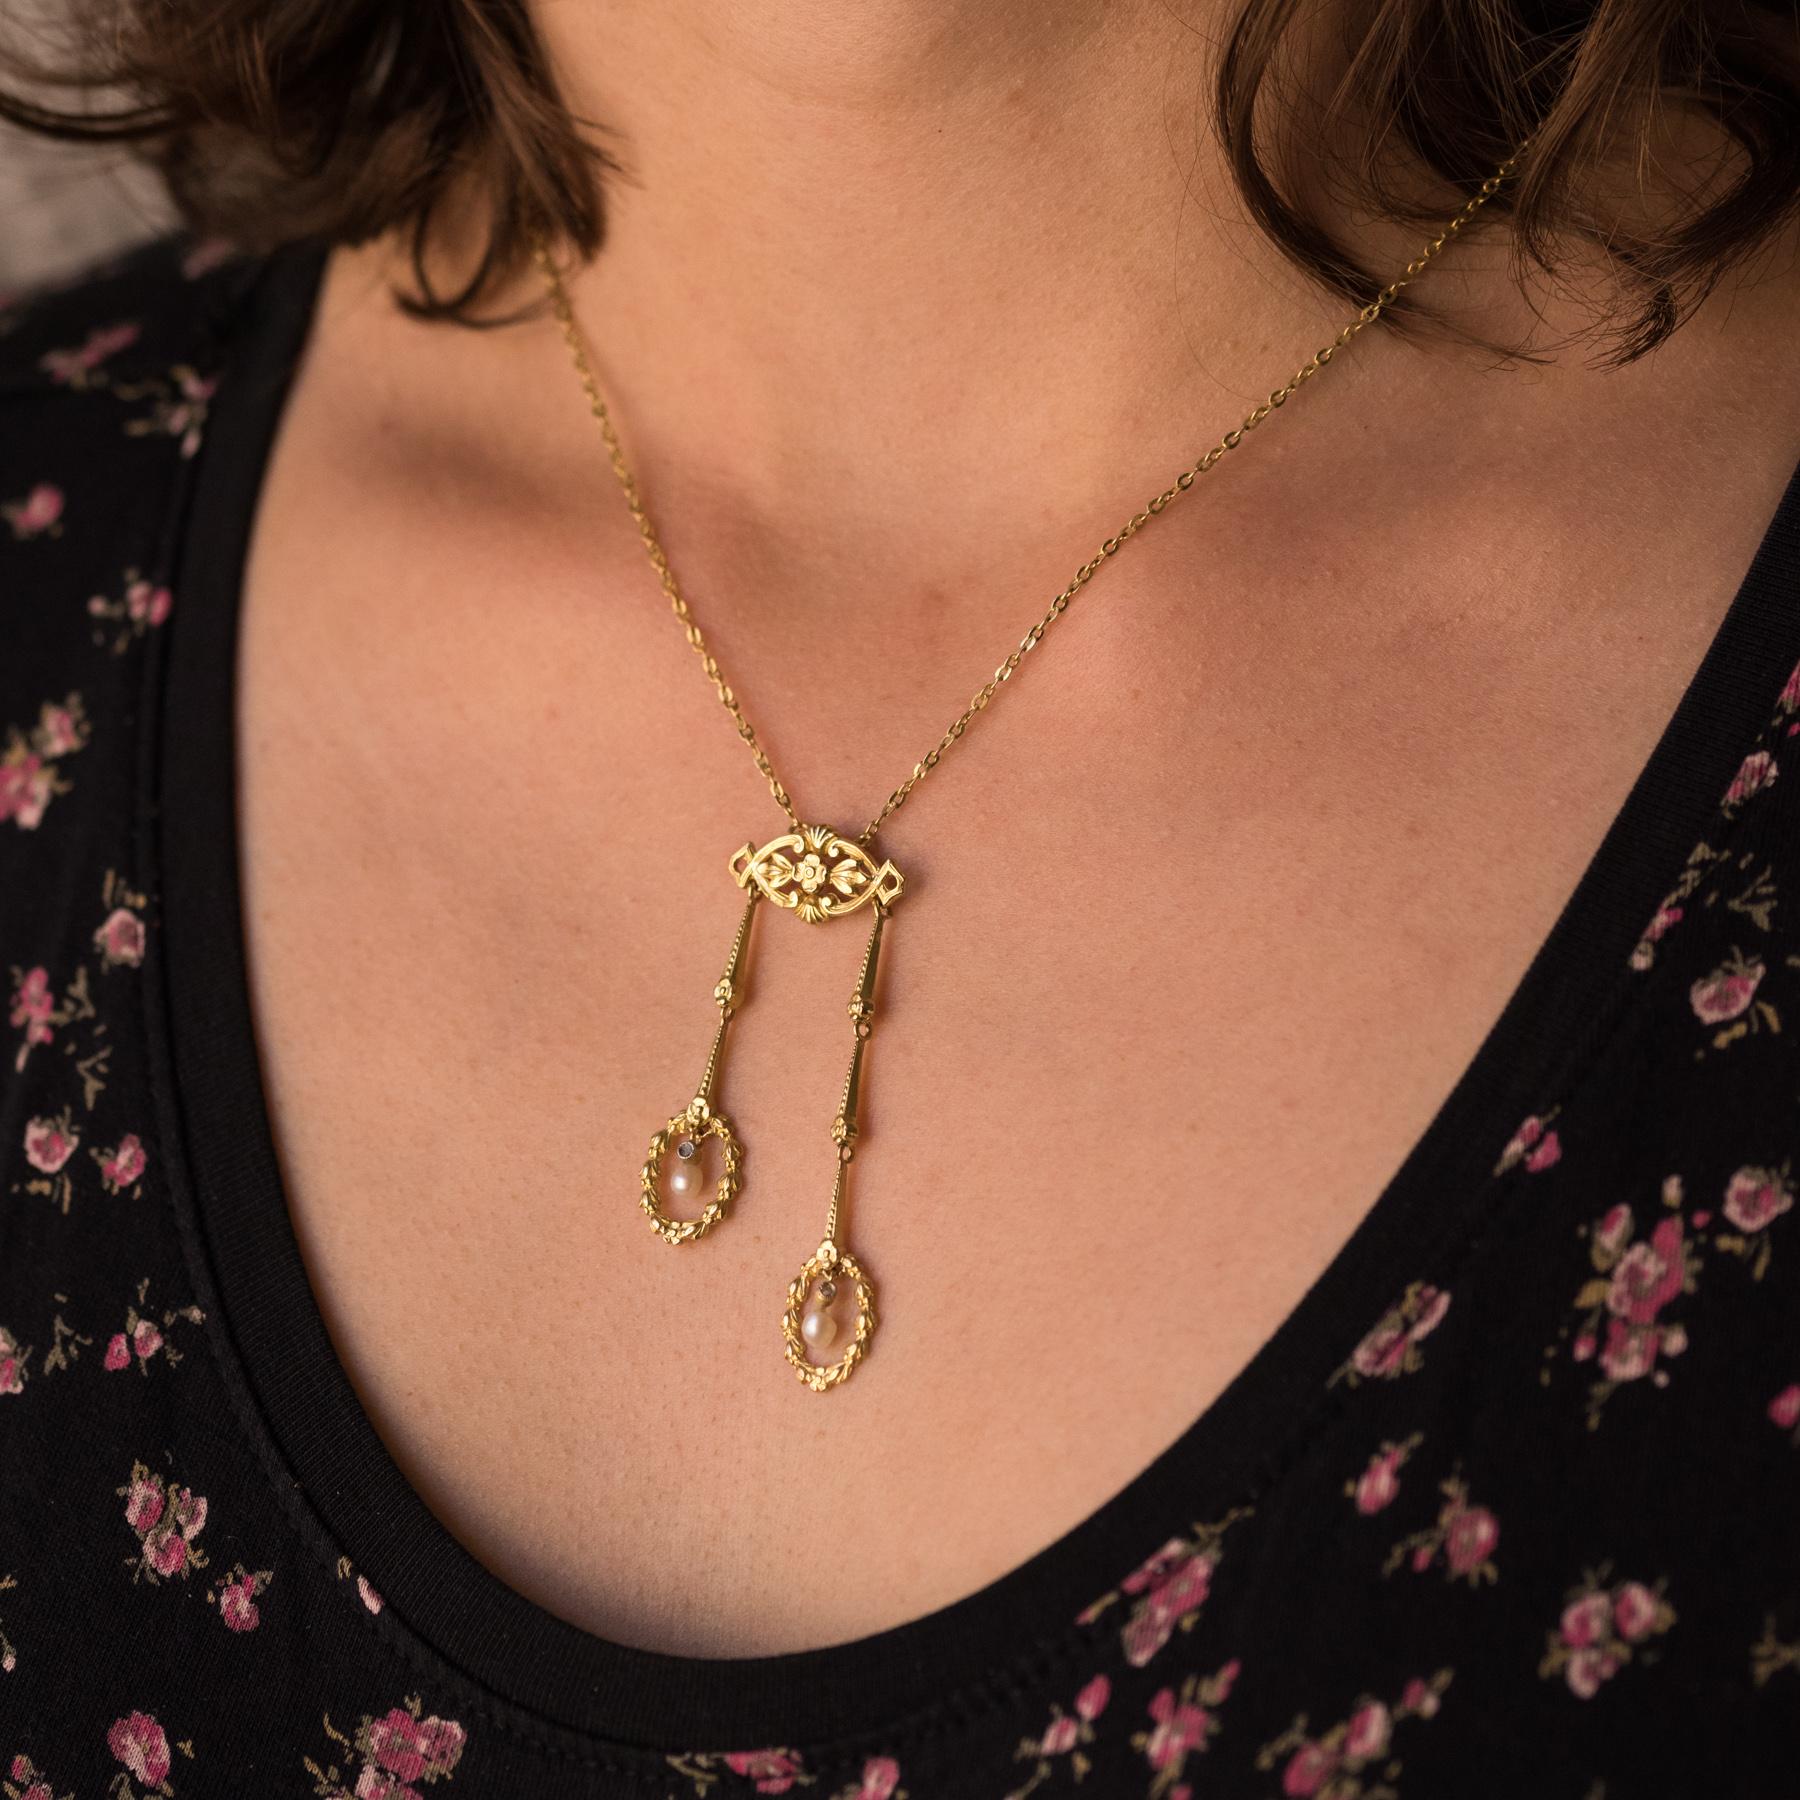 Necklace in 18 karats yellow gold, eagle's head hallmark.
Absolutely delightful, this antique necklace is made up of a convolute mesh chain which retains as a tassel asymmetrically 2 motifs engraved with vegetal and floral decorations. Each ends